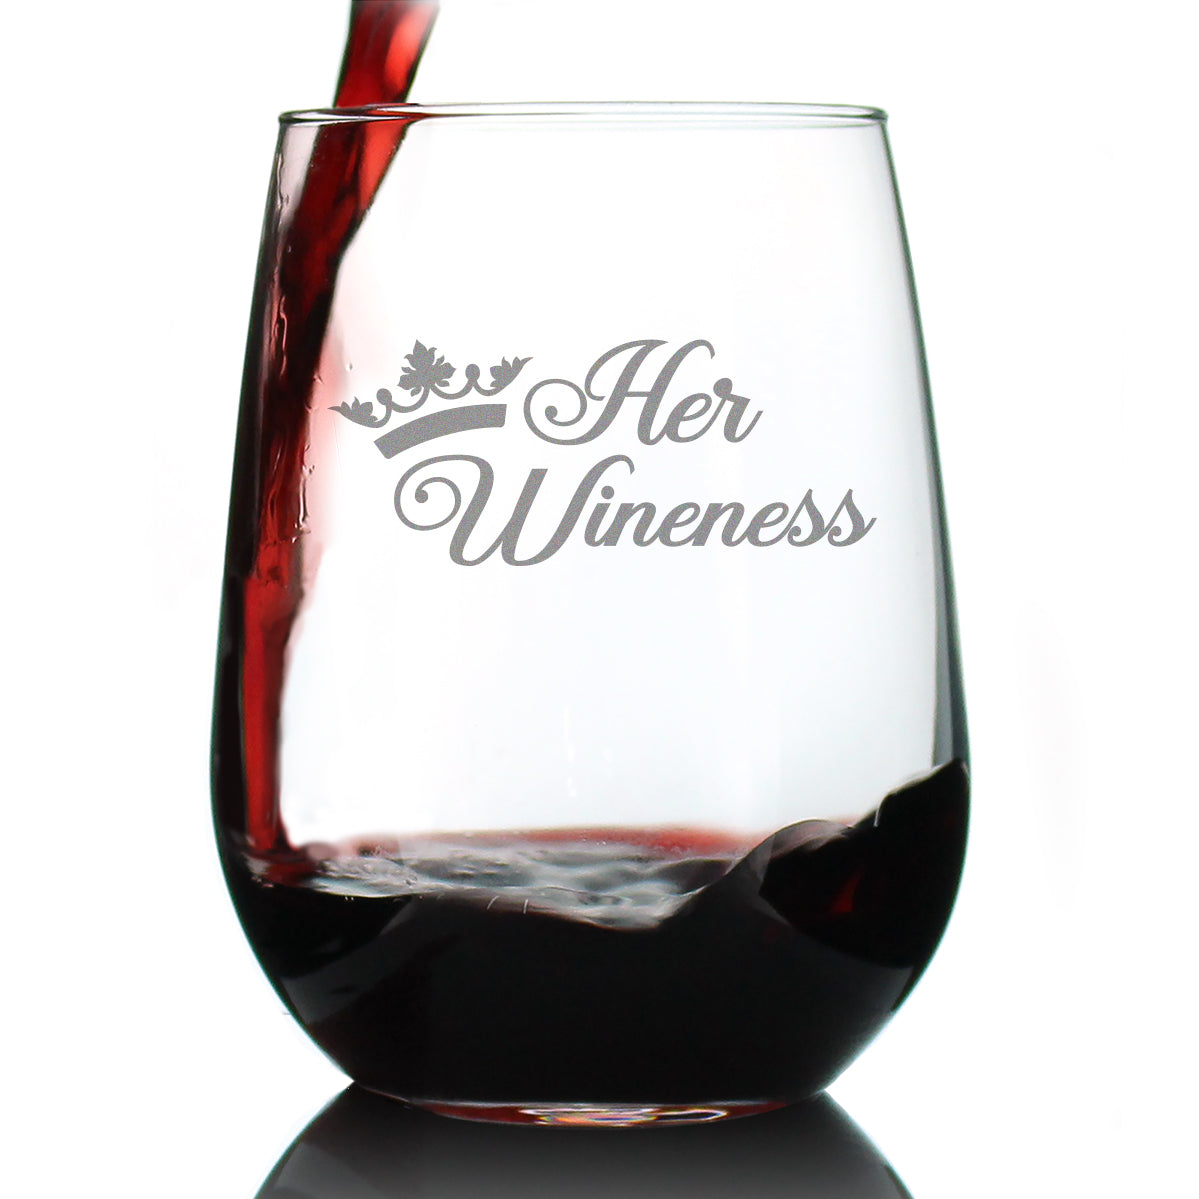 Her Wineness – Cute Funny Stemless Wine Glass, Large 17 Ounces, Etched Sayings, Gift Box